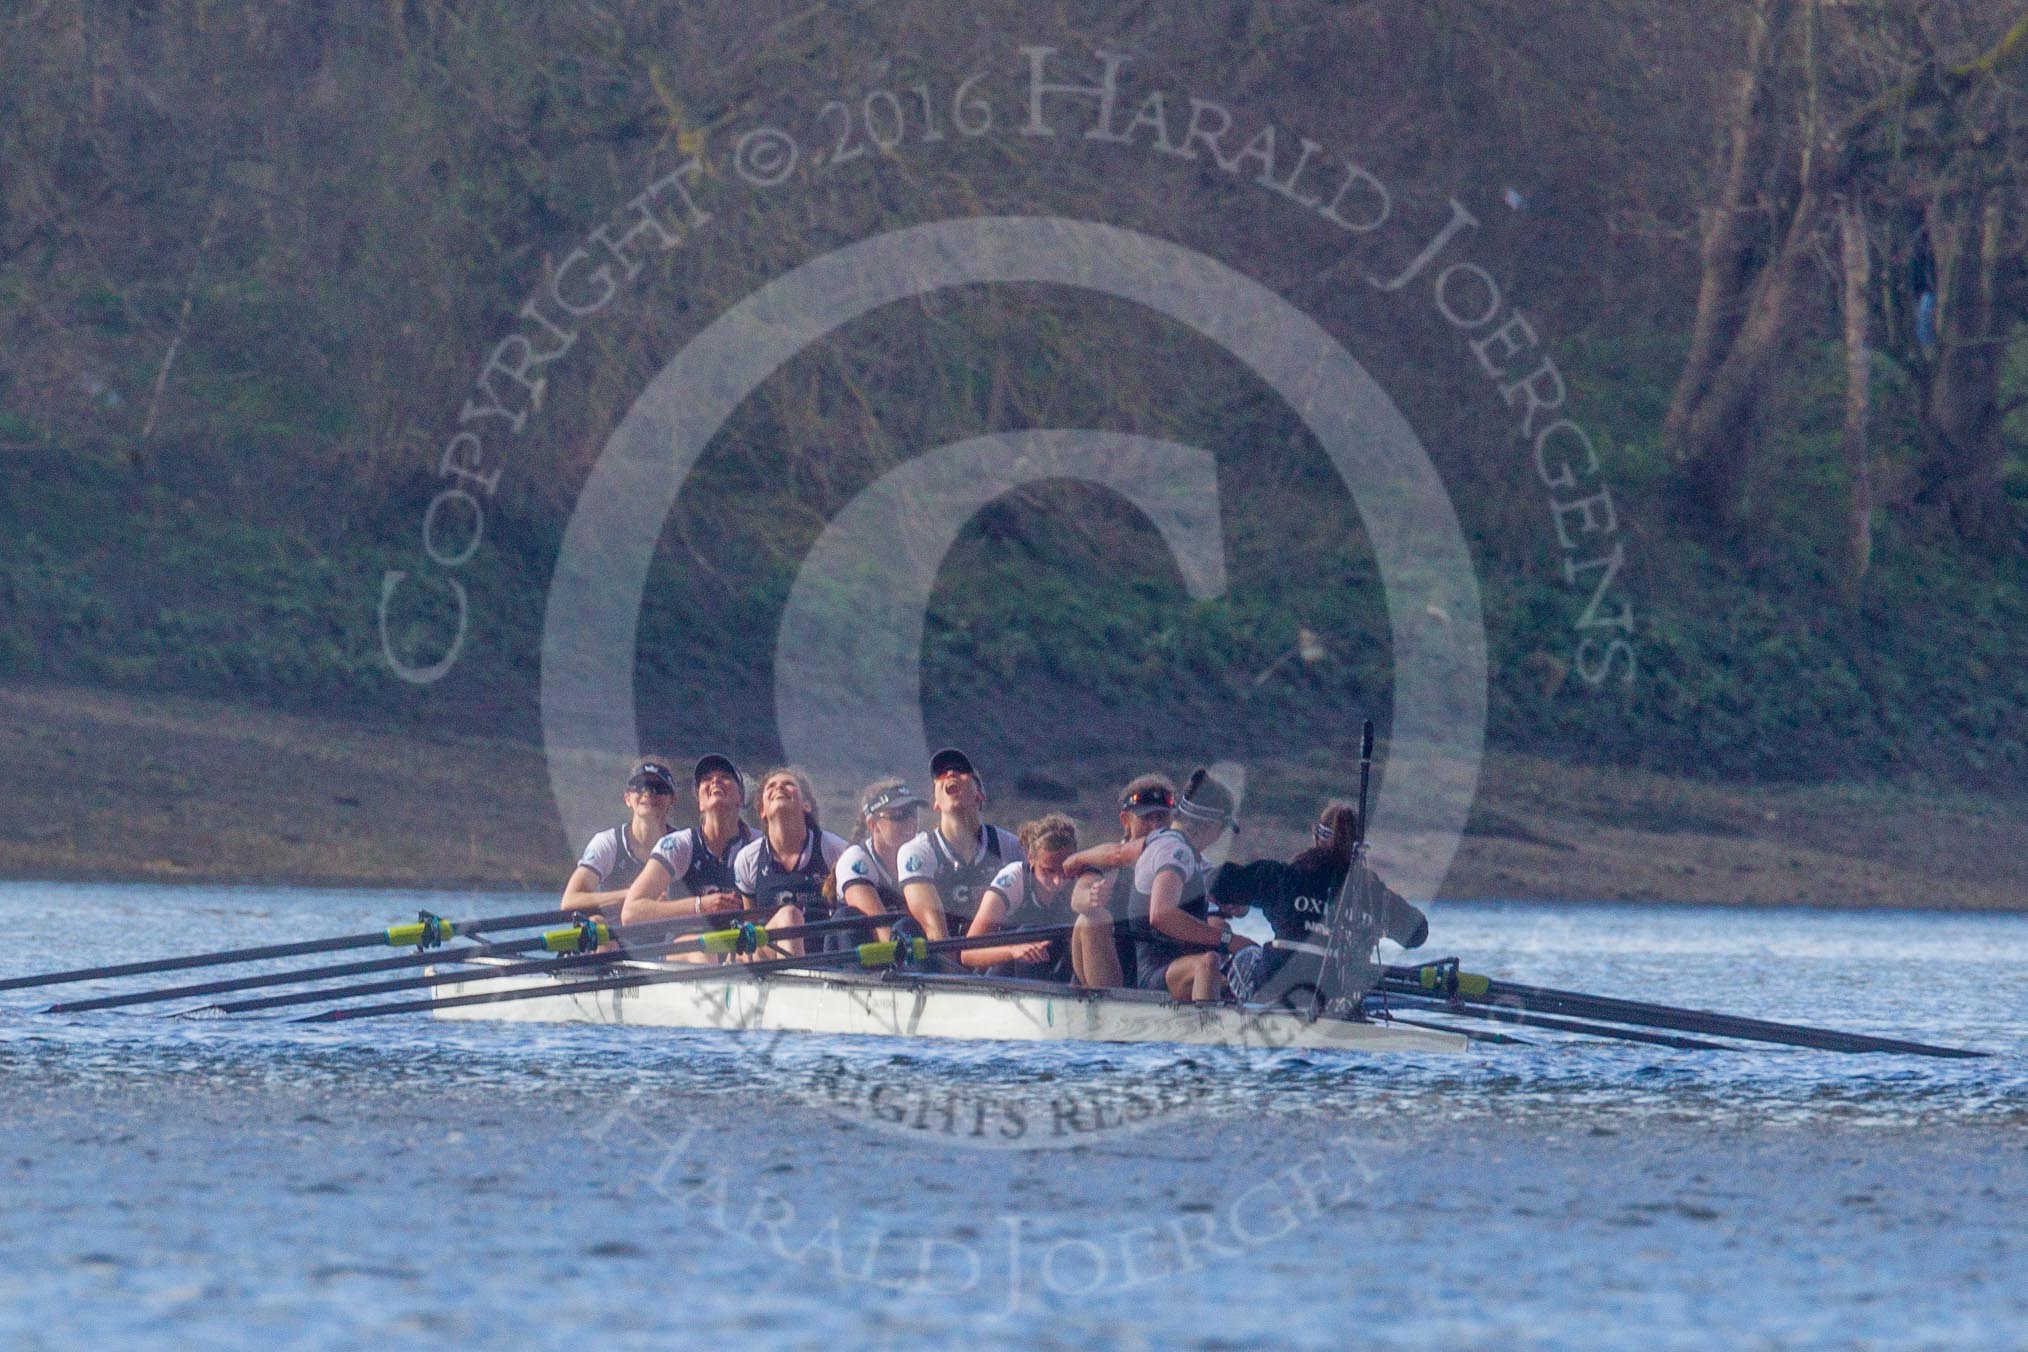 The Boat Race season 2016 -  The Cancer Research Women's Boat Race.
River Thames between Putney Bridge and Mortlake,
London SW15,

United Kingdom,
on 27 March 2016 at 14:33, image #311